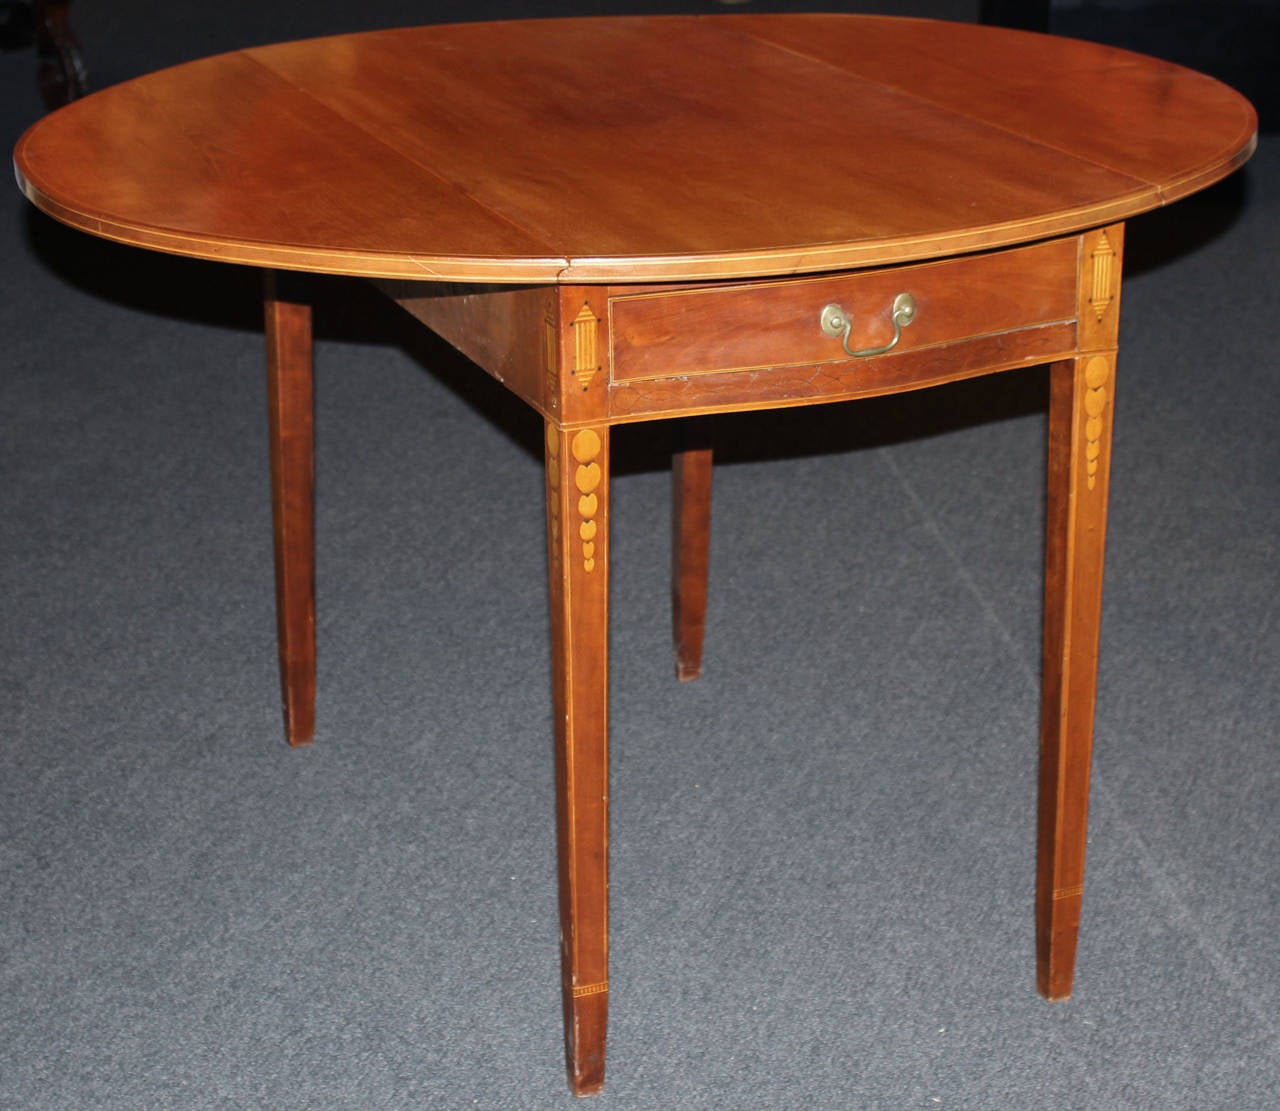 American Federal Period CT River Valley William Lloyd Cherry Pembroke Table with Inlay